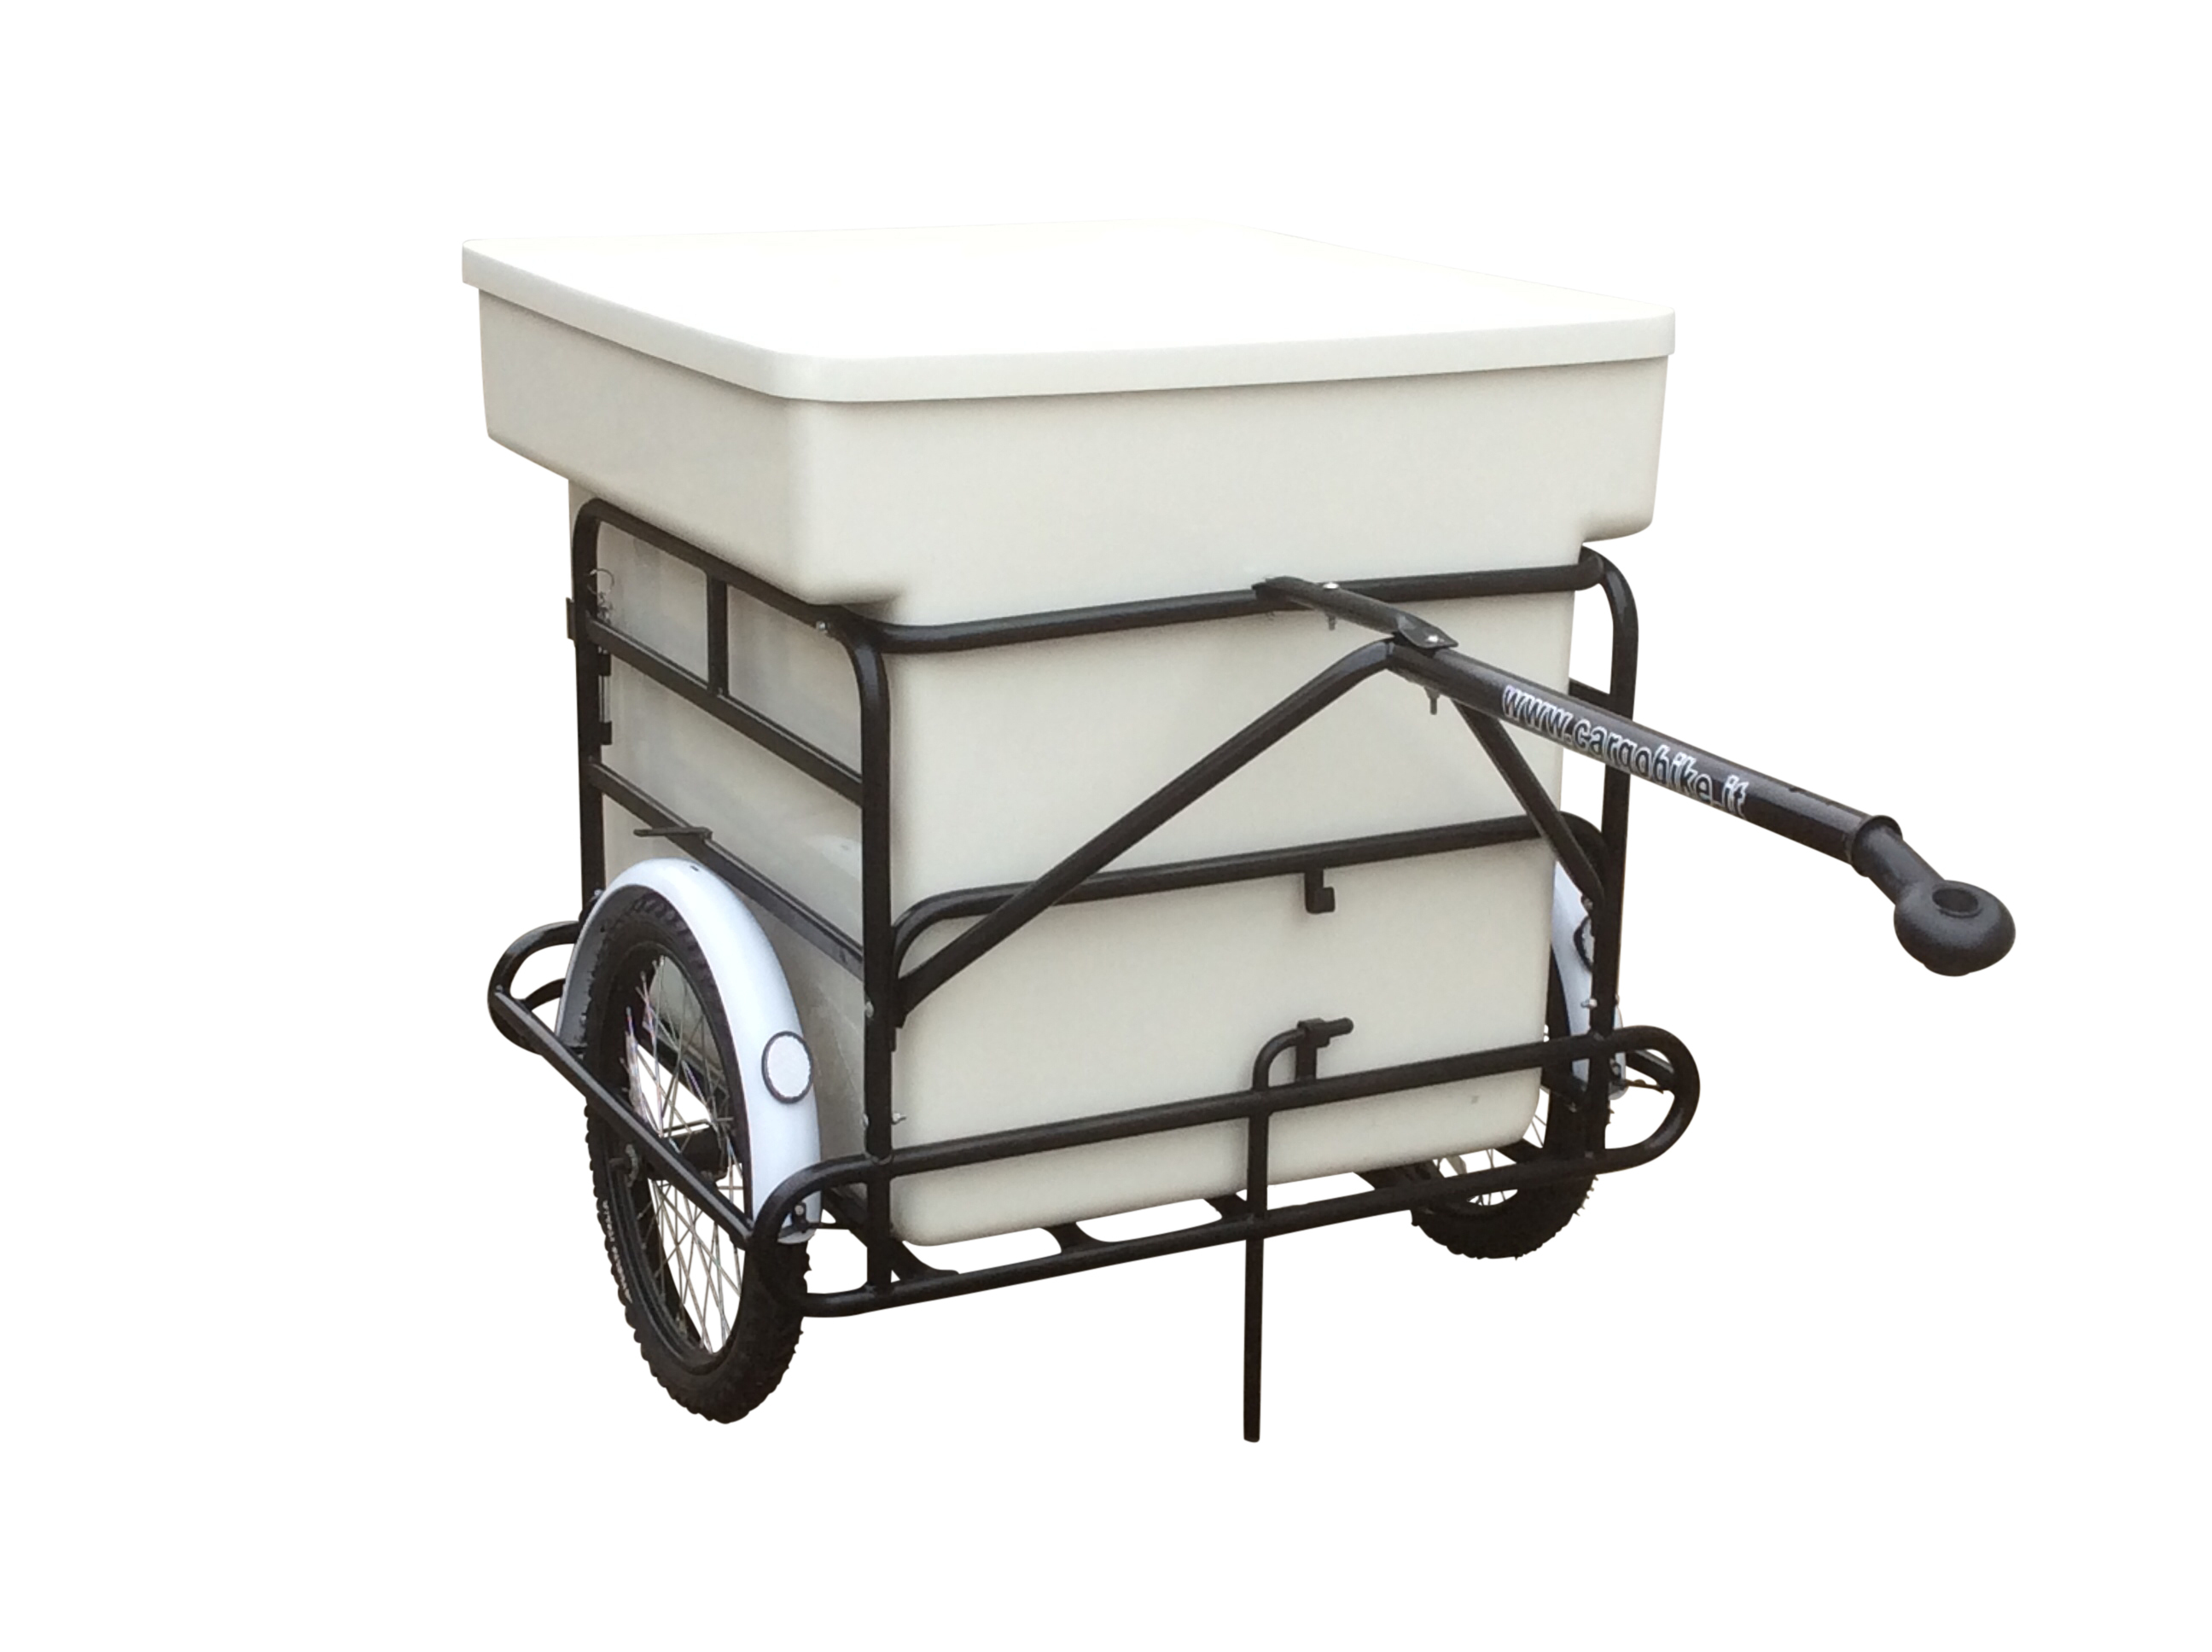 WAGON_TRAILER_FOR_BICYCLE_FOR_STREET_FOOD_CATERING_2